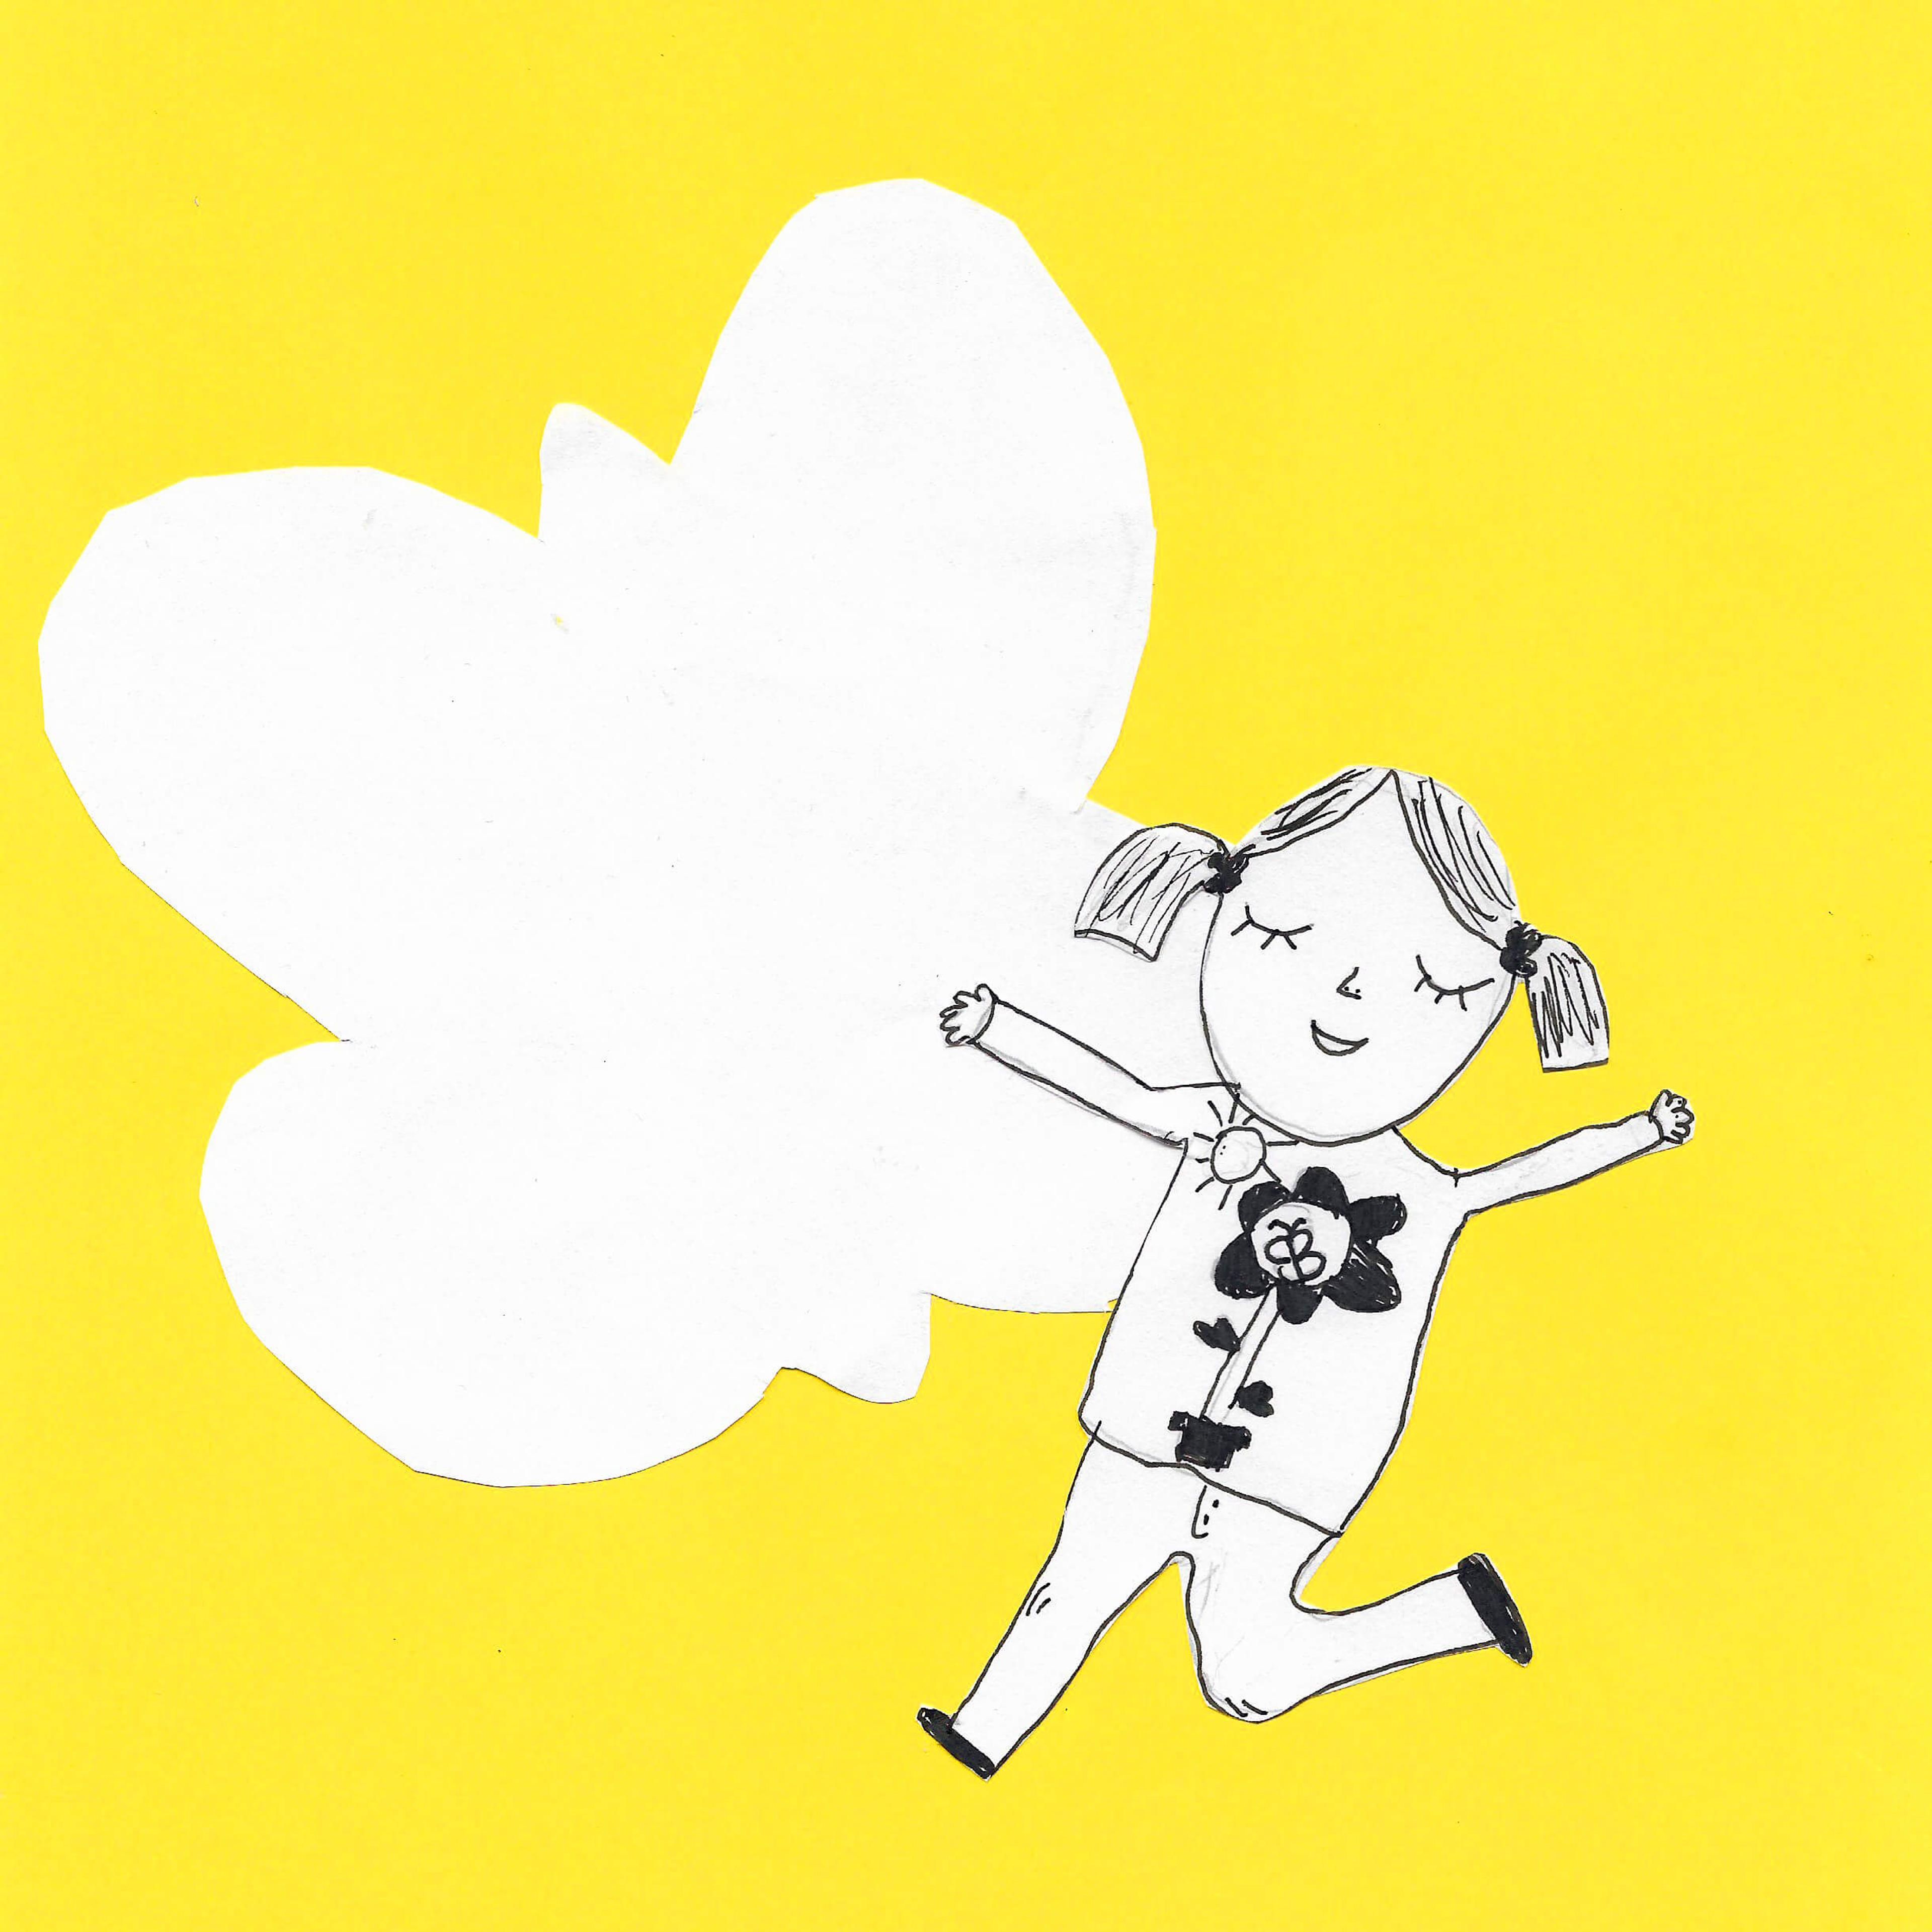 A pen and ink illustration of a happy child running, set against a bright yellow backdrop